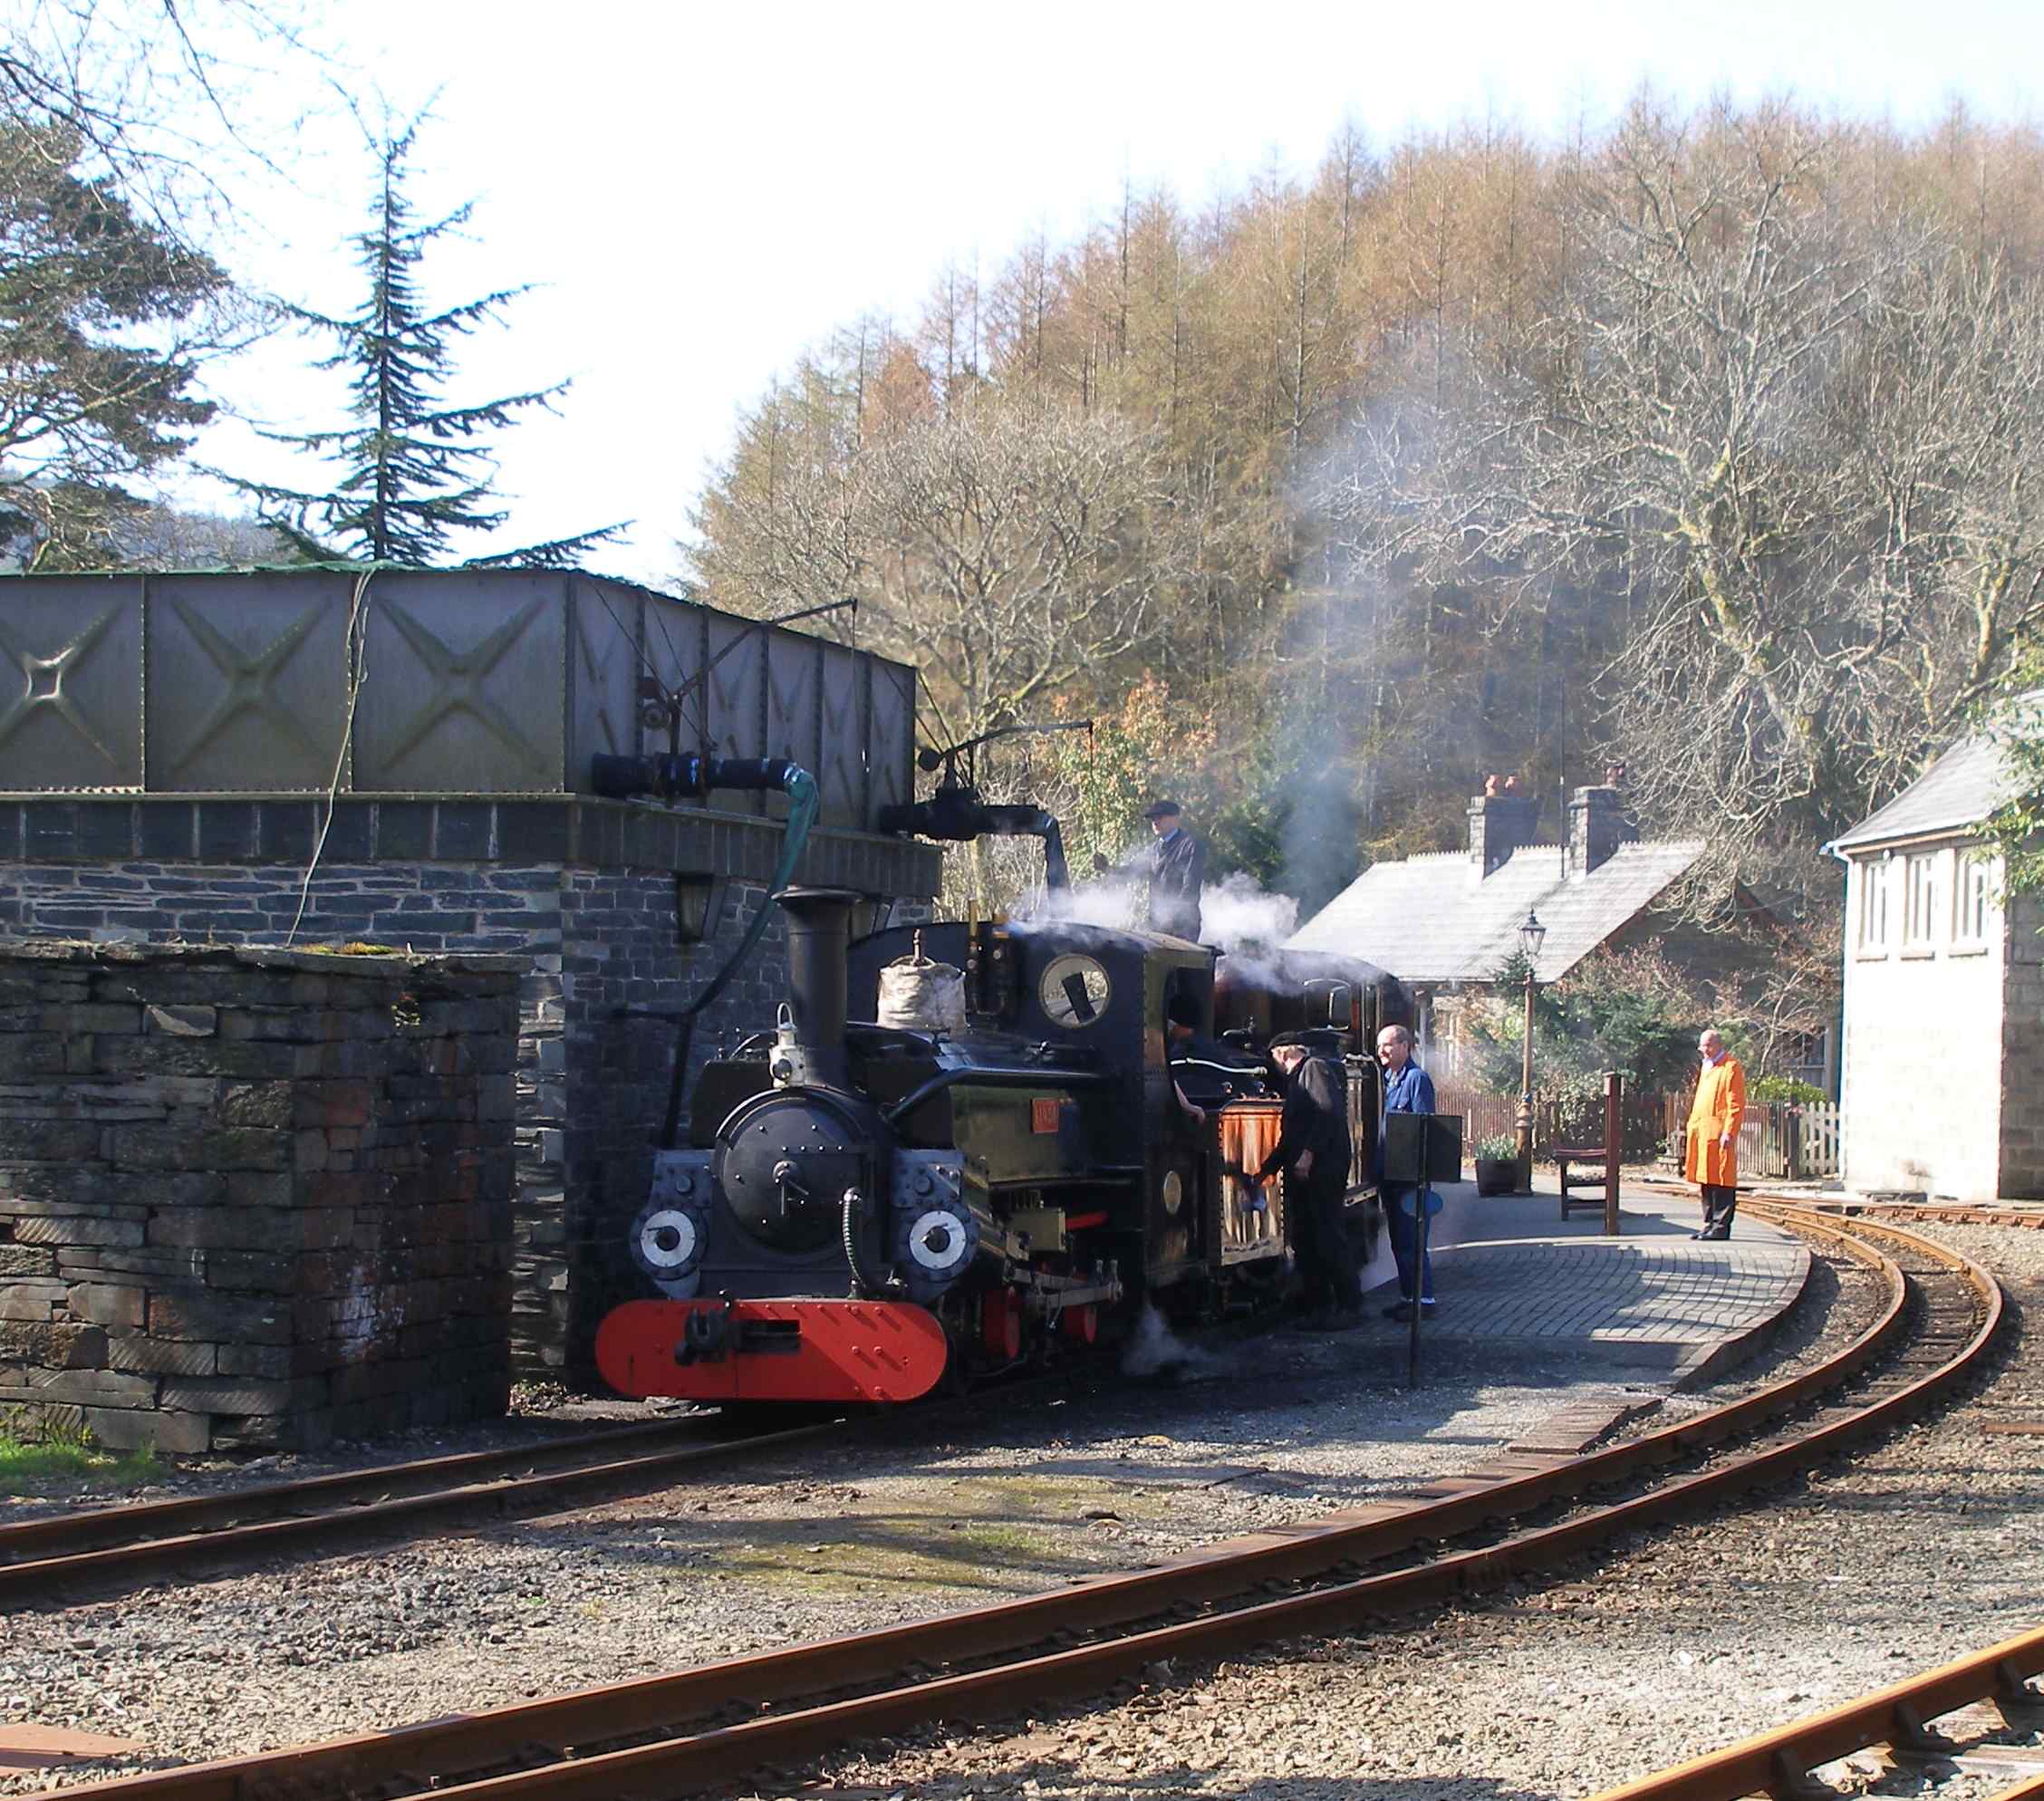 'Merddin Emrys' and 'Linda' stand at the water tank at Tan-y-Bwlch. The driver can be seen in the act of removing the Lancashire & Yorkshire Railway badge from the tender (shame!). This reflected the origins of the restoration team, who hailed from the two counties mentioned. The breeze block structure to the right was constructed as a signal box, very much in the style of one that featured in Meccano's Bayko construction set as it features domestic window frames. There was a set of GWR signal box windows that sat in the car park for some time, but were ultimately not used. The structure now houses the relays to work the automated signalling at this location. 